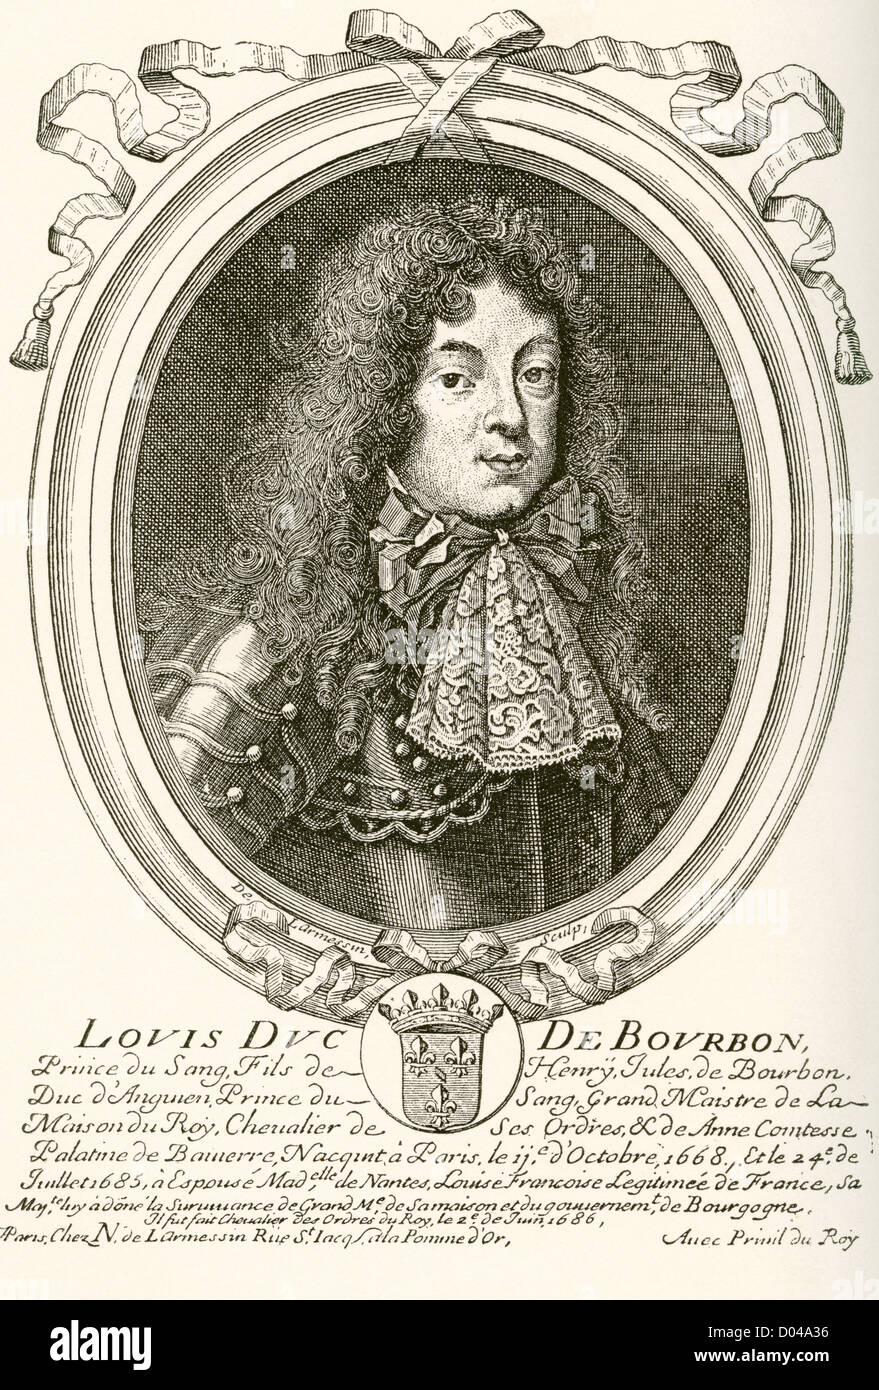 Louis de Bourbon, Prince of Condé, 1668 - 1710. Prince of the blood at the French court of Louis XIV. Stock Photo